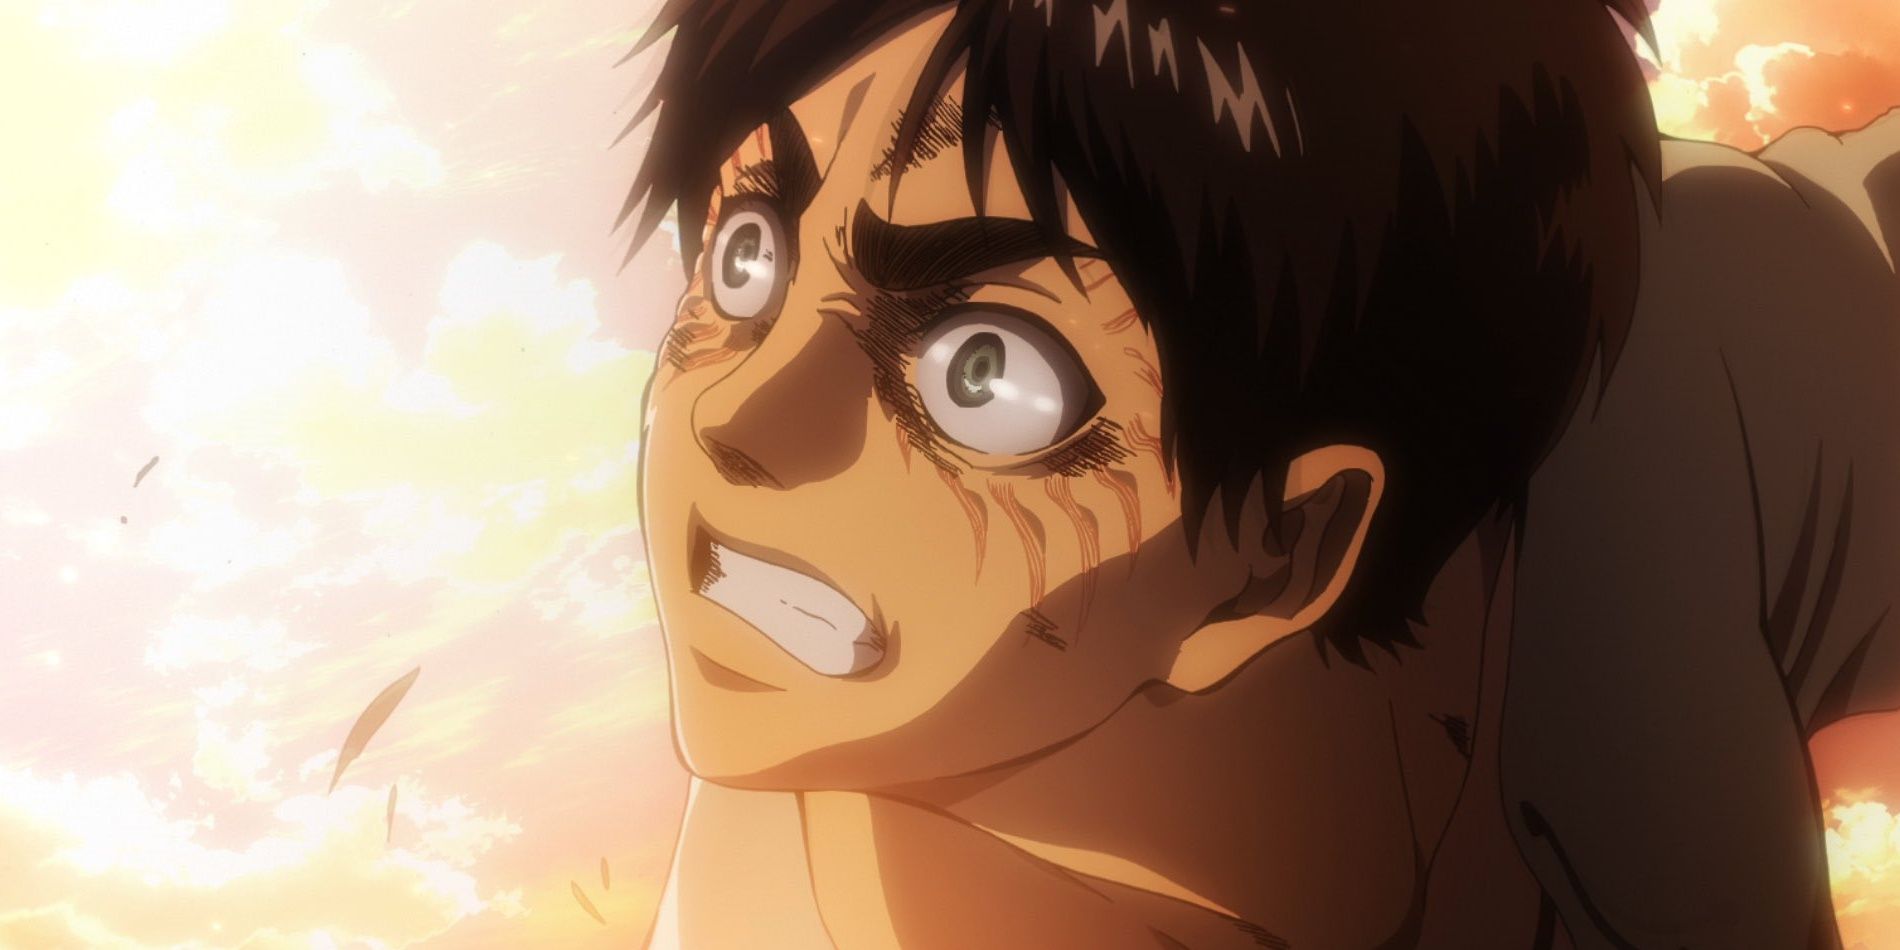 eren yeager bares his teeth as he faces a bright yellow light.